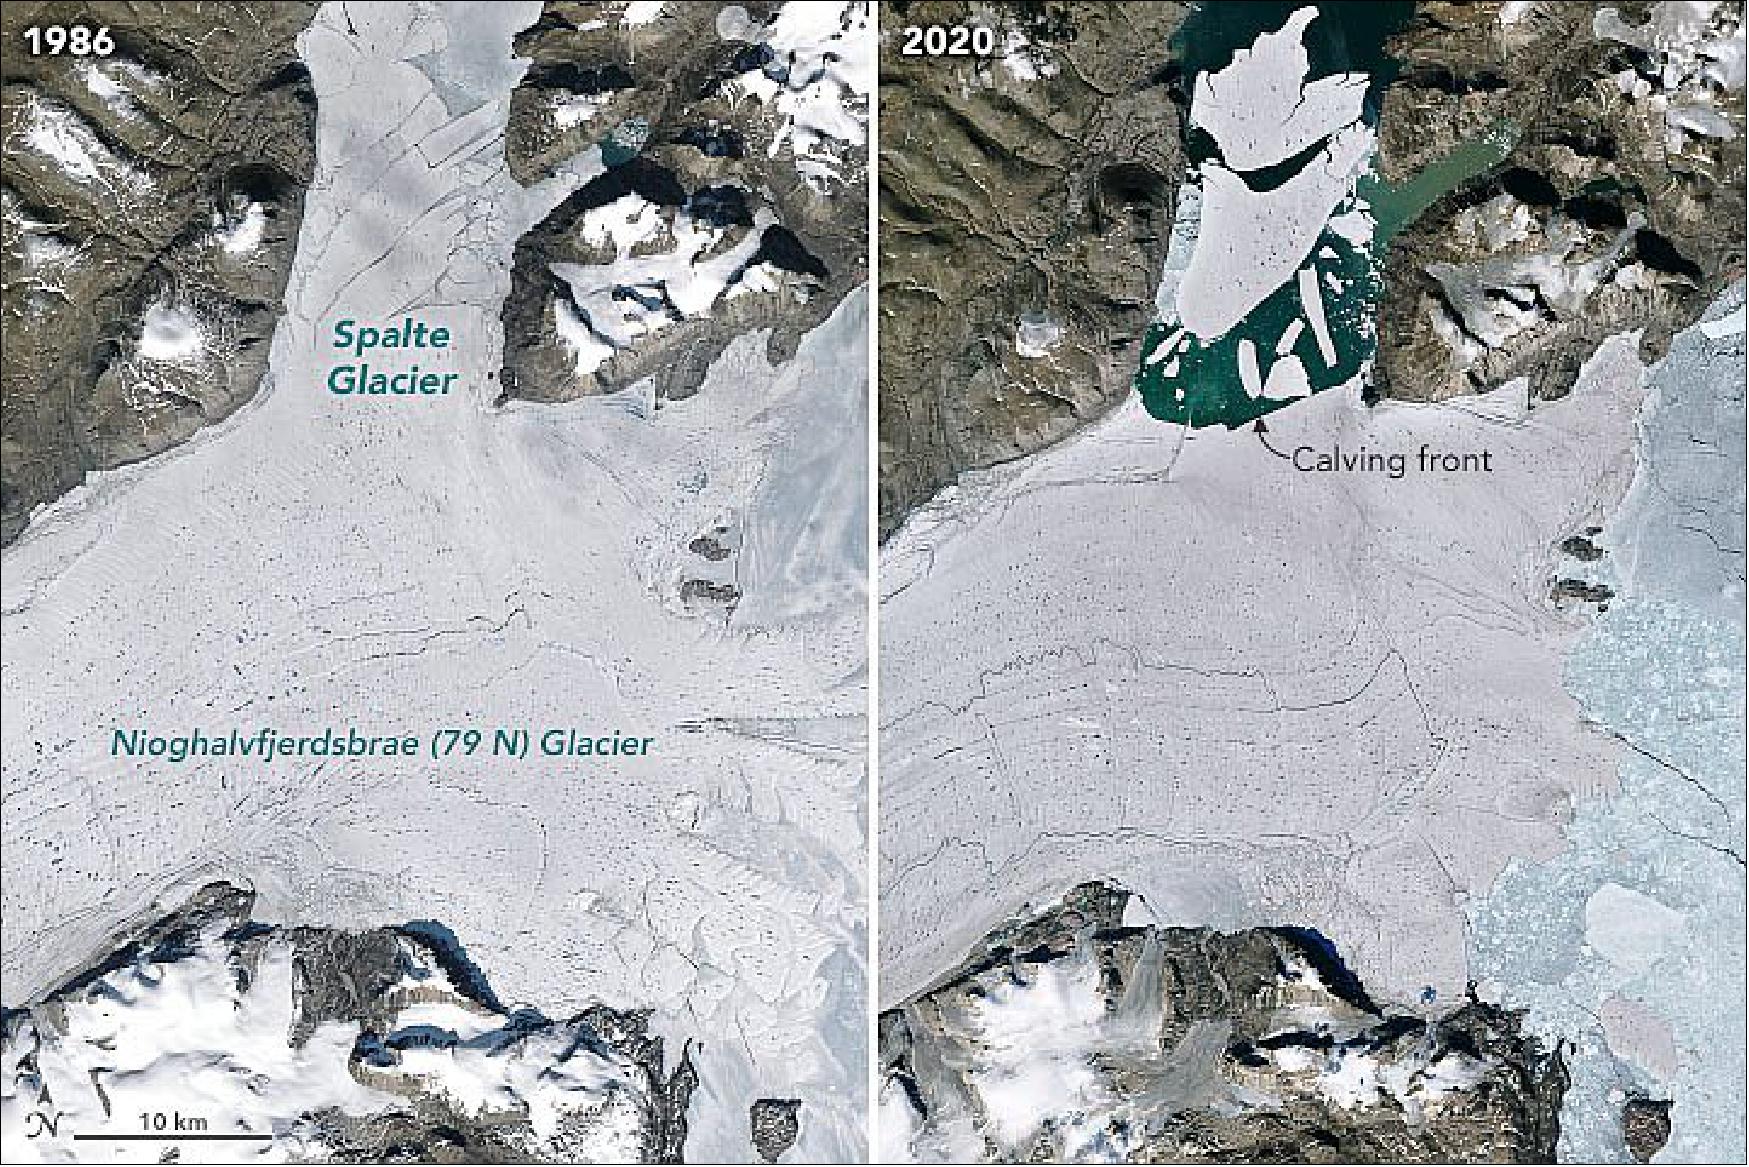 Figure 29: The pair of satellite images show changes in the region across three decades. The right image was acquired with the OLI instrument on Landsat-8 on July 24, 2020, nearly one month after Spalte Glacier broke up. For comparison, the left image from Landsat-5 shows the glacier system on August 16, 1986 (image credit: NASA Earth Observatory images by Joshua Stevens, using Landsat data from the U.S. Geological Survey. Story by Kathryn Hansen)